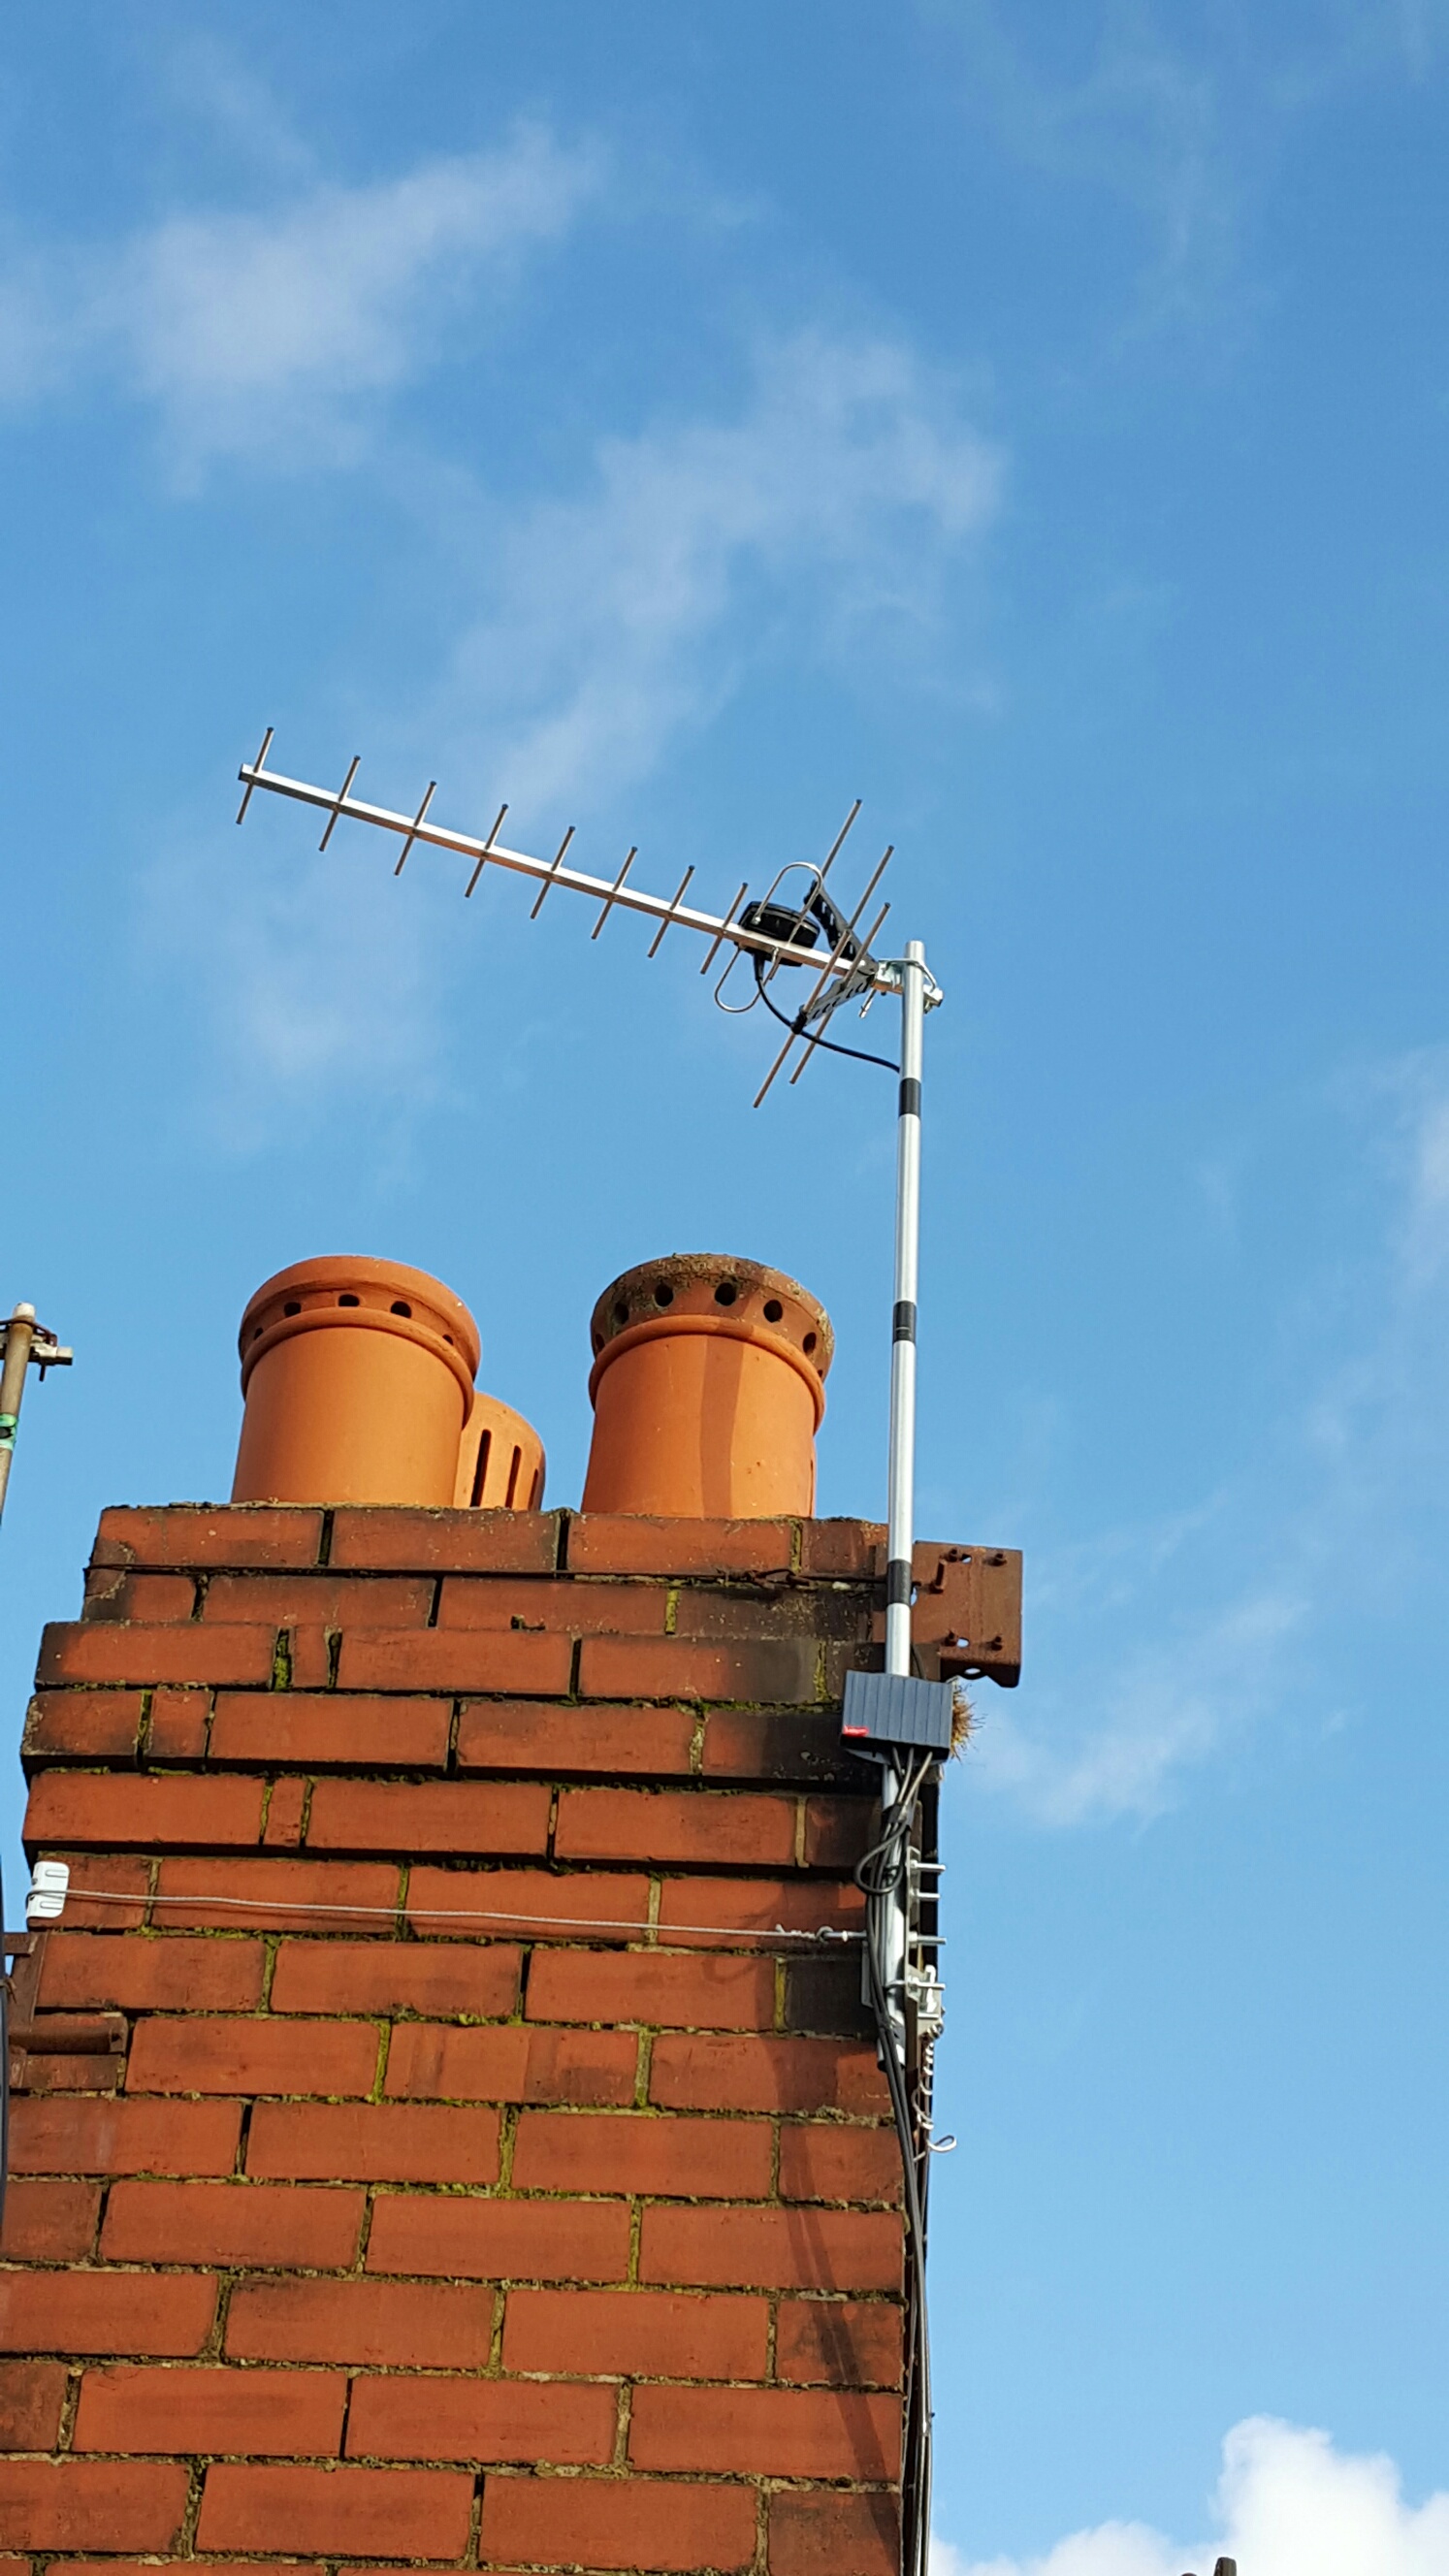 Urmston Tv Aerials and extra points